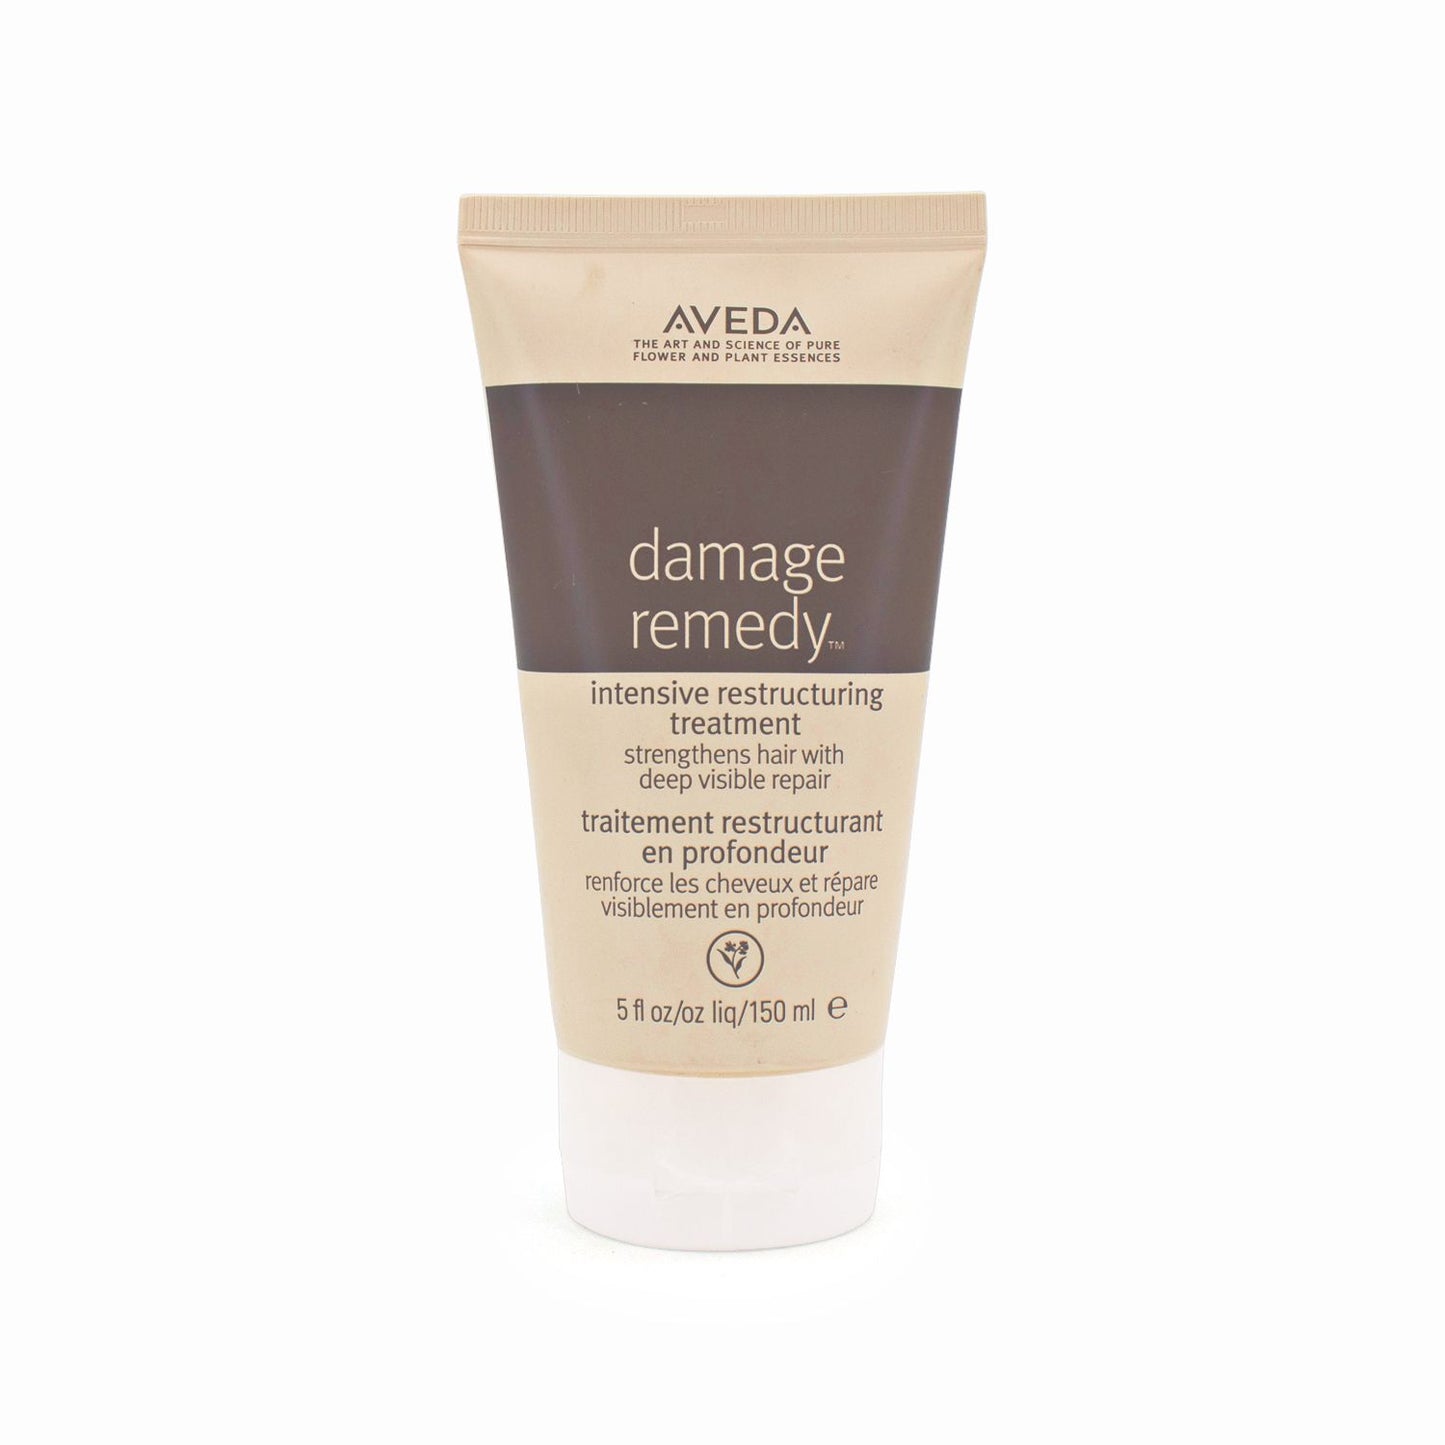 Aveda Damage Remedy Restructuring Treatment 150ml - Imperfect Container